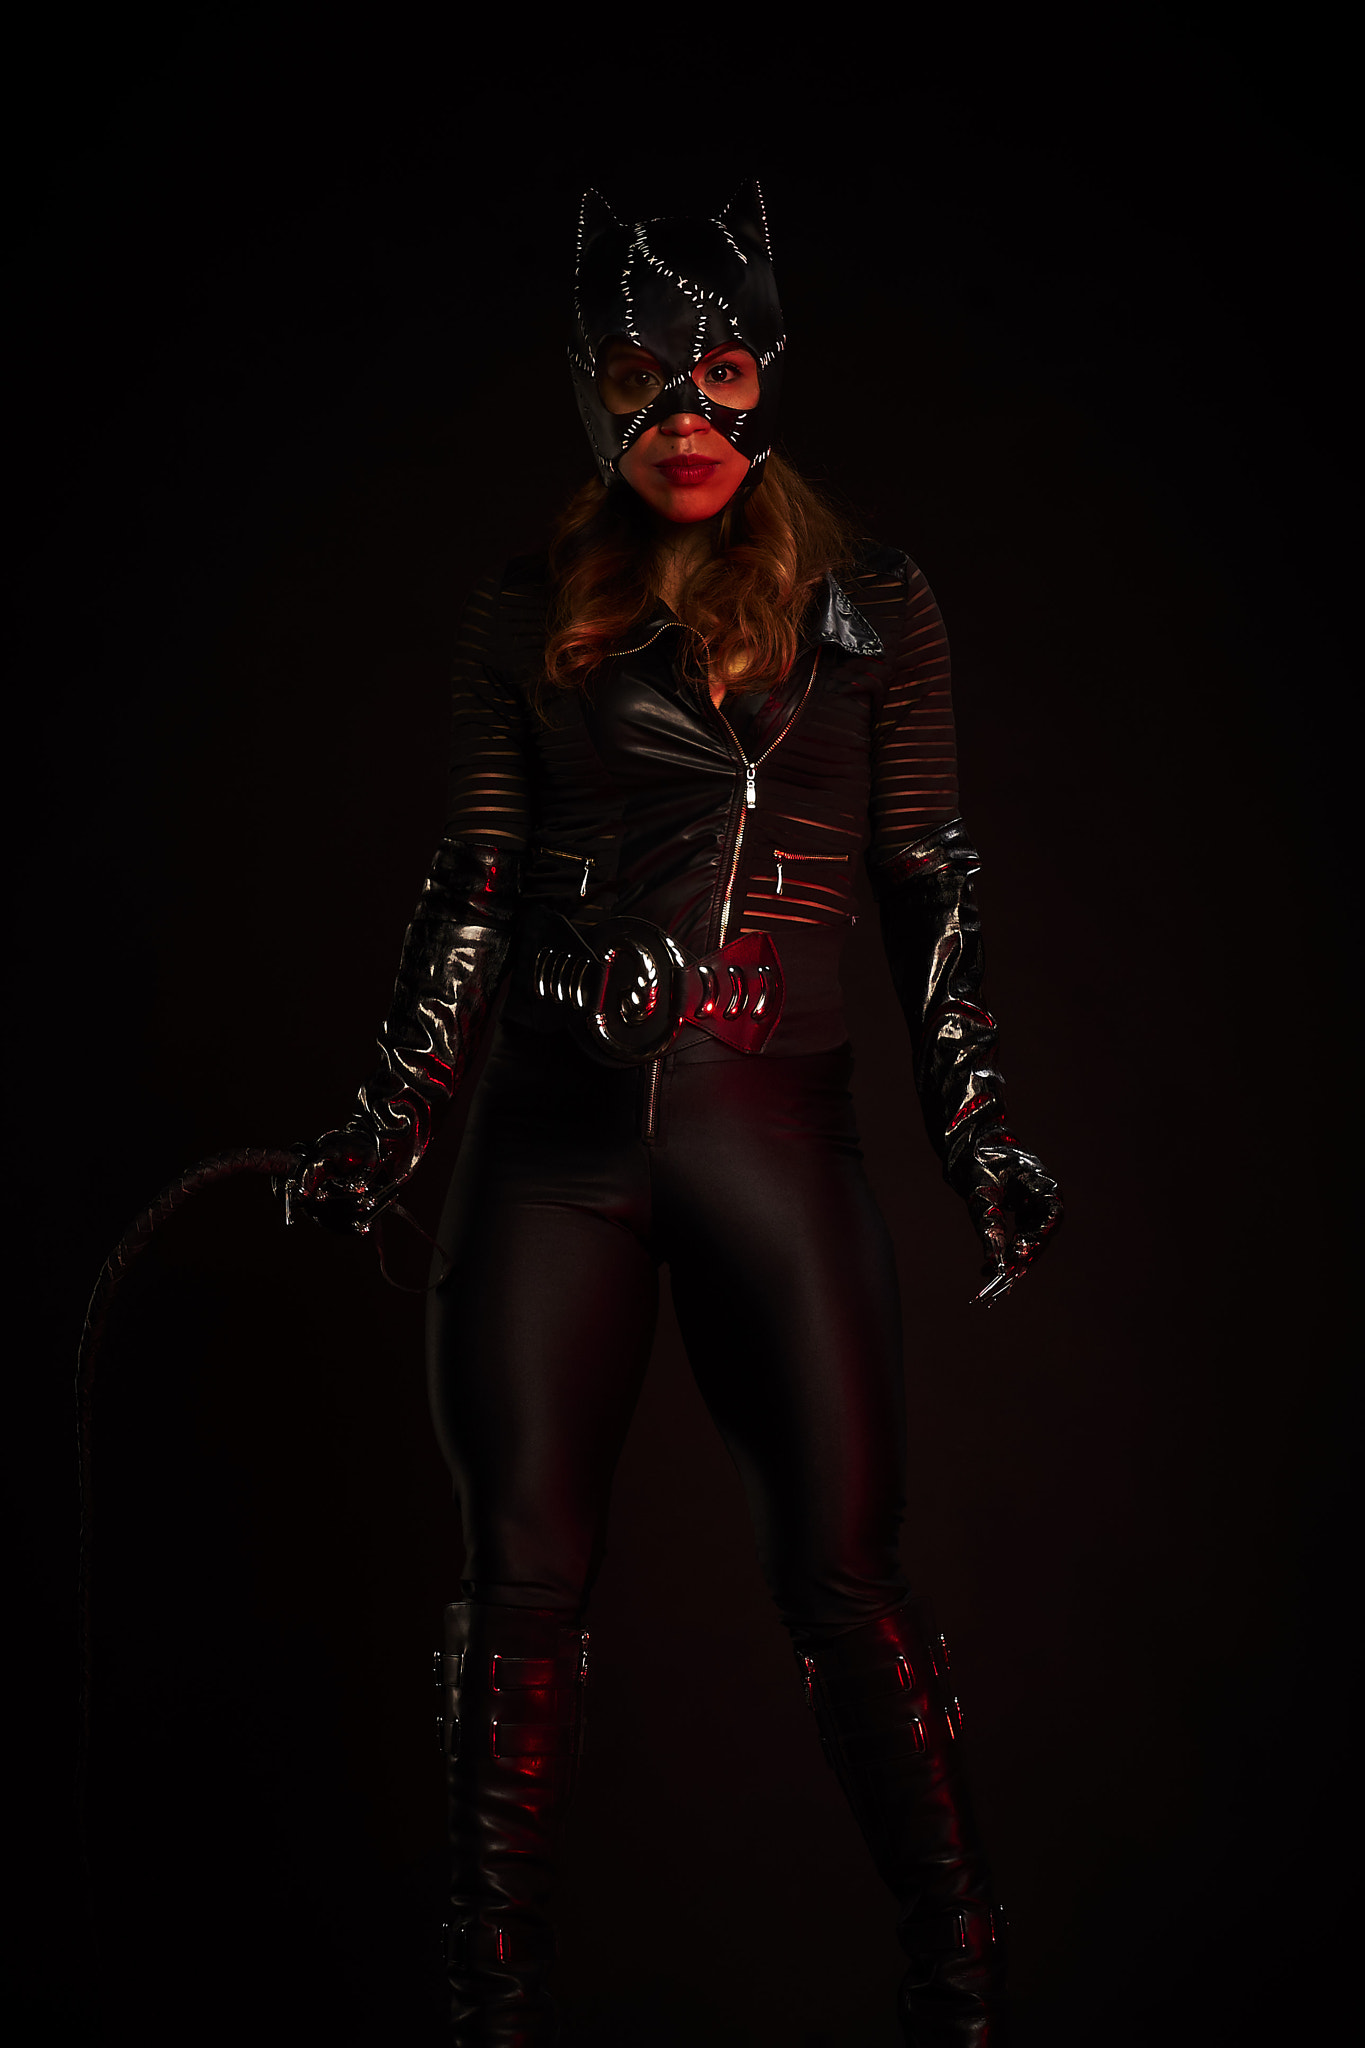 Sony a7 sample photo. Cat woman 2017 photography